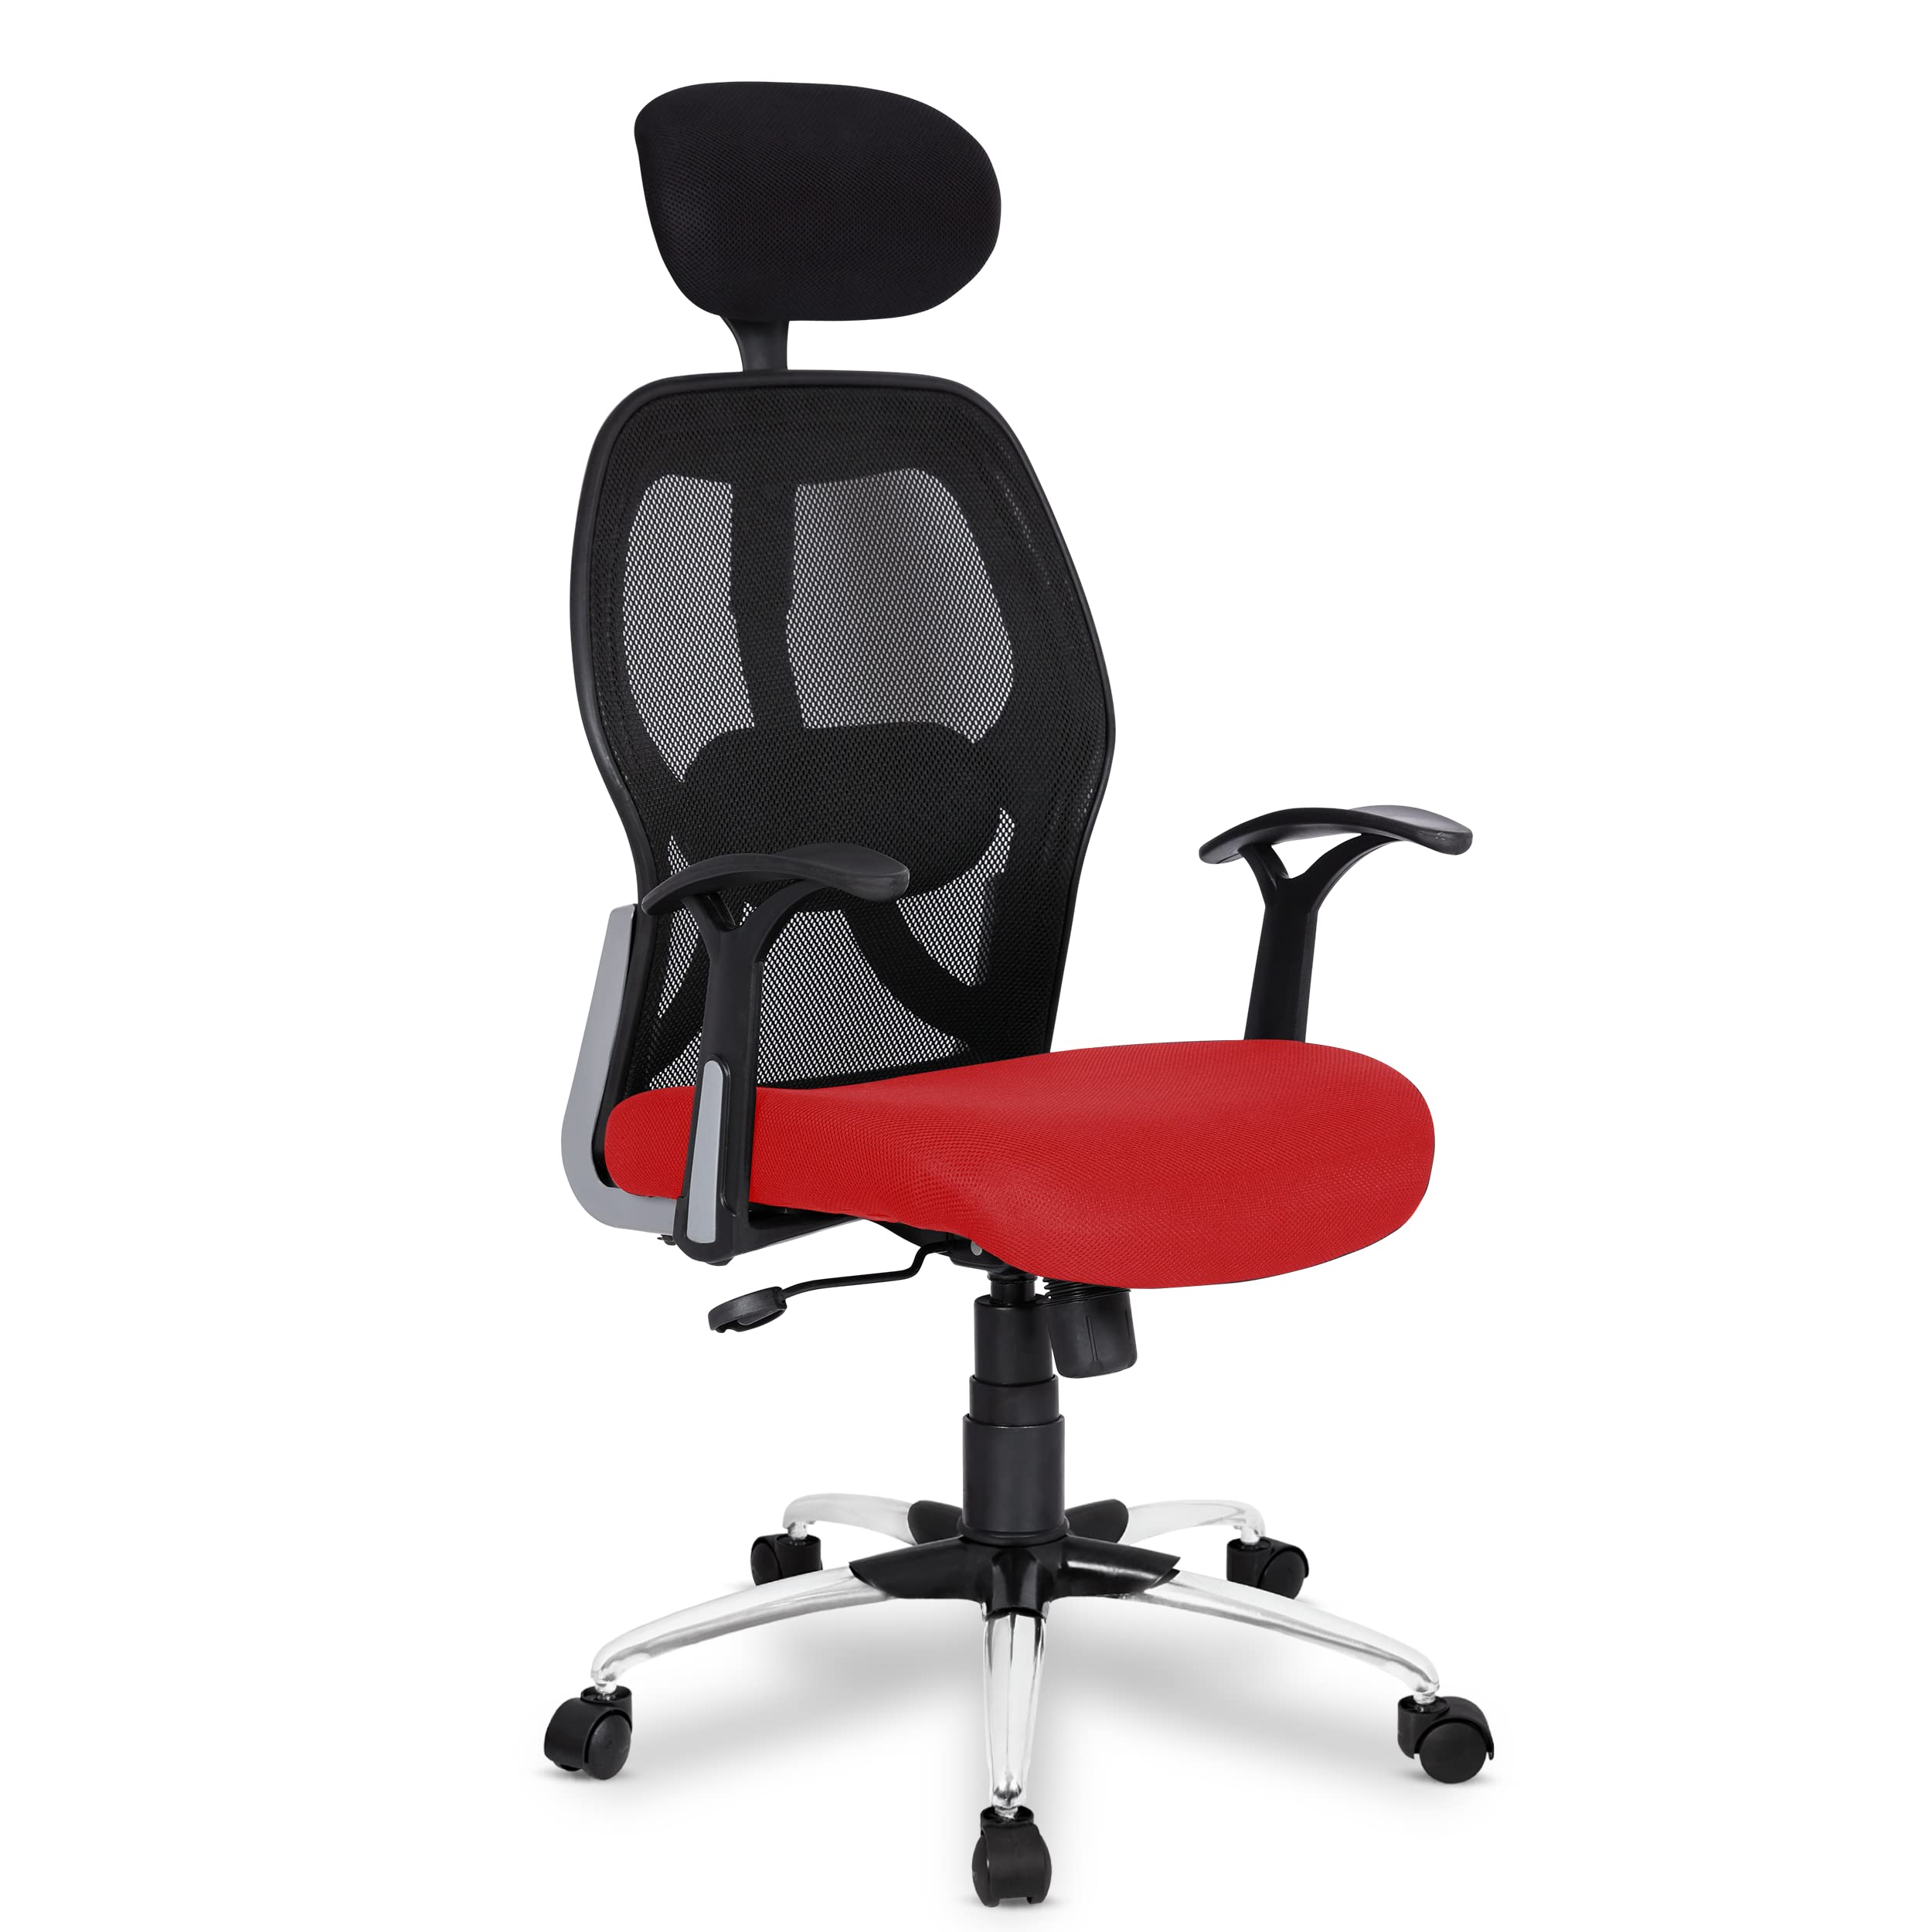 SAVYA HOME Virtue Chair with Armrest, High Comfort Home Chair, Office Chair,  Study chair Leatherette Office Adjustable Arm Chair Price in India - Buy  SAVYA HOME Virtue Chair with Armrest